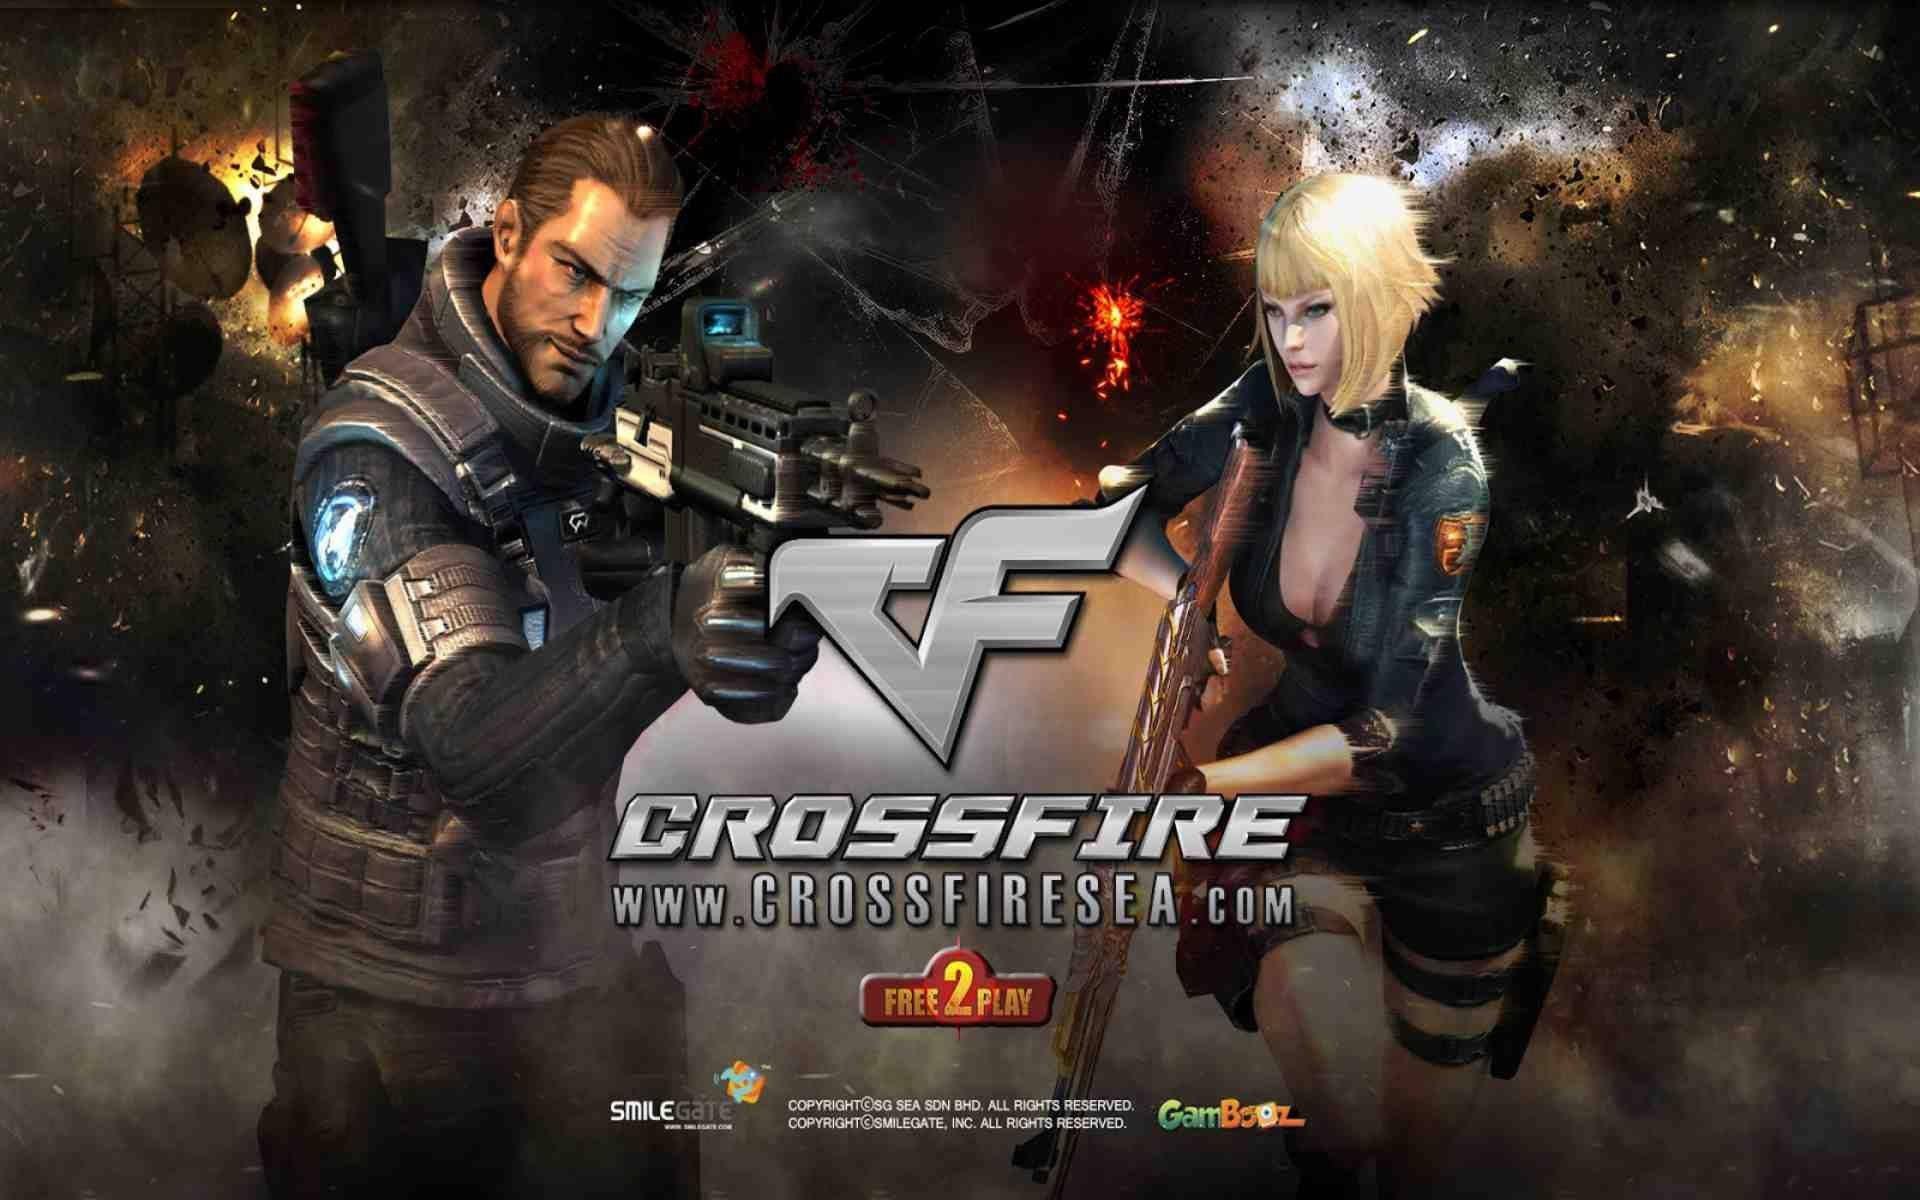 Crossfire 2019 Game Poster Background